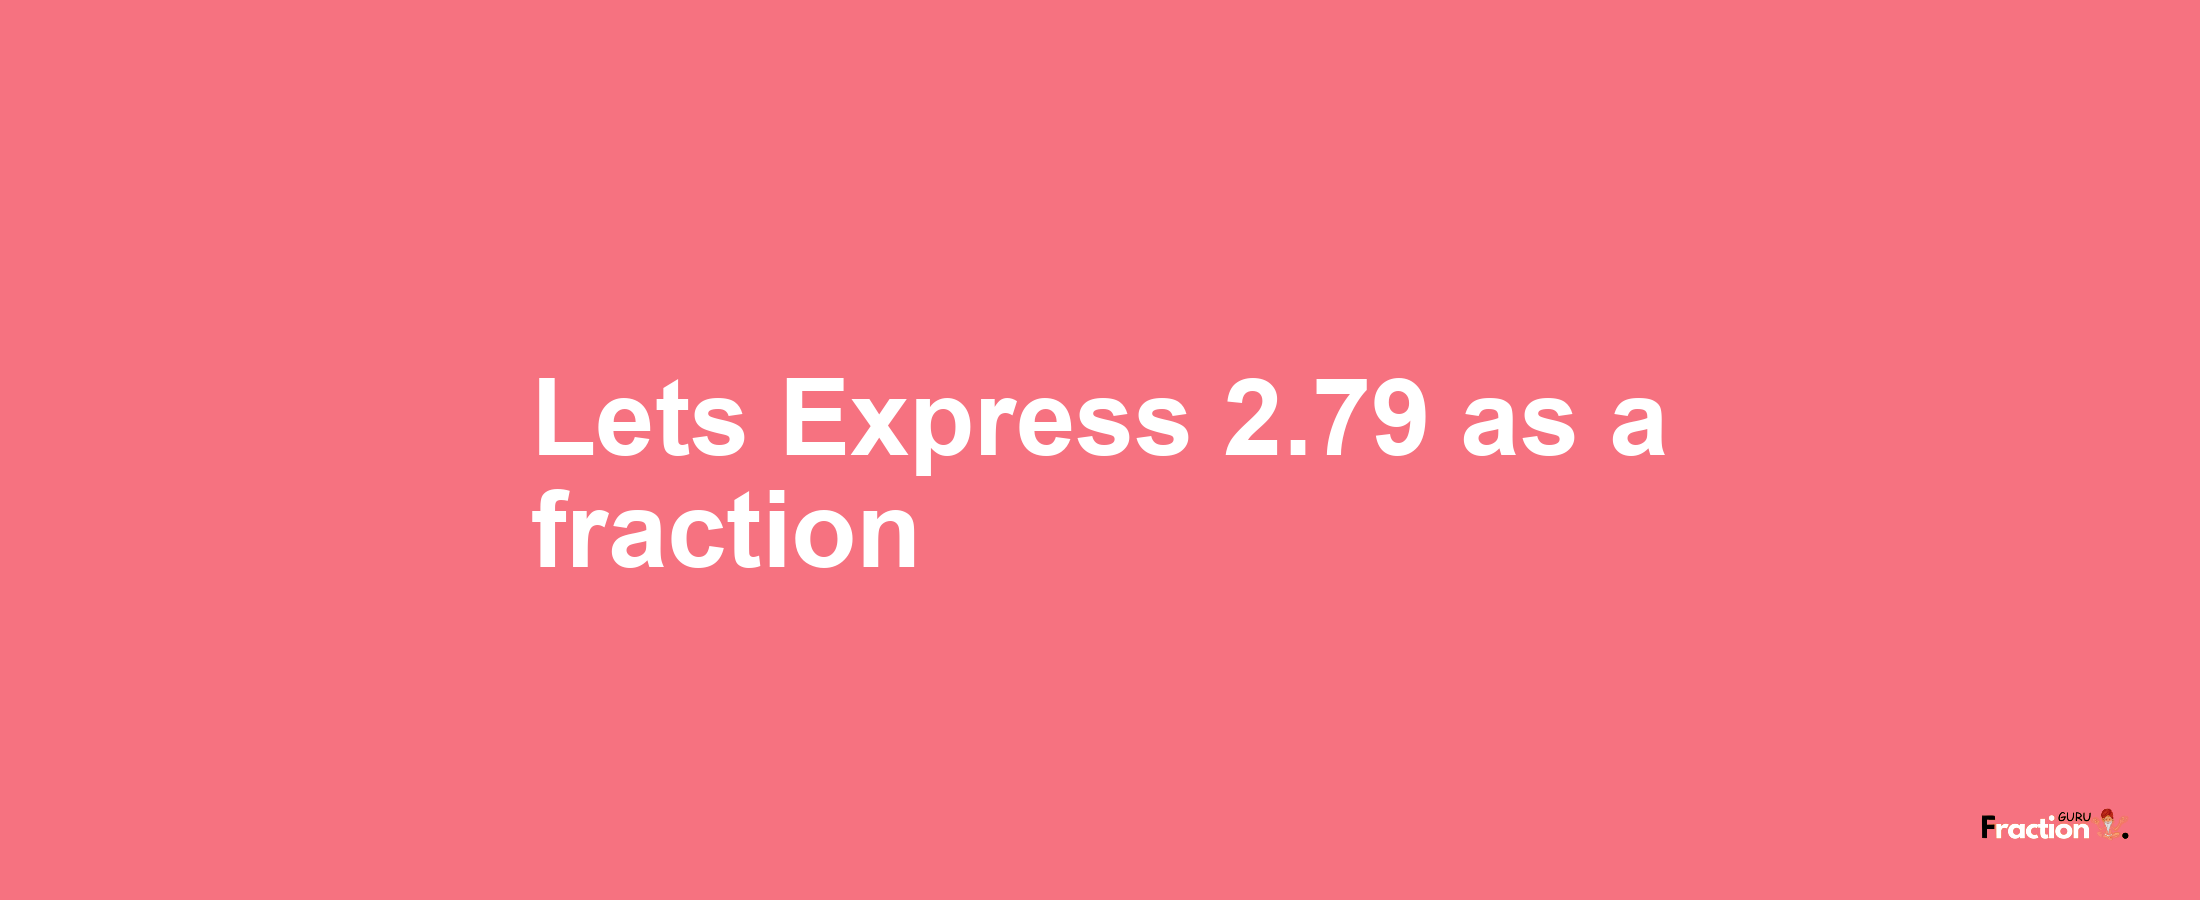 Lets Express 2.79 as afraction